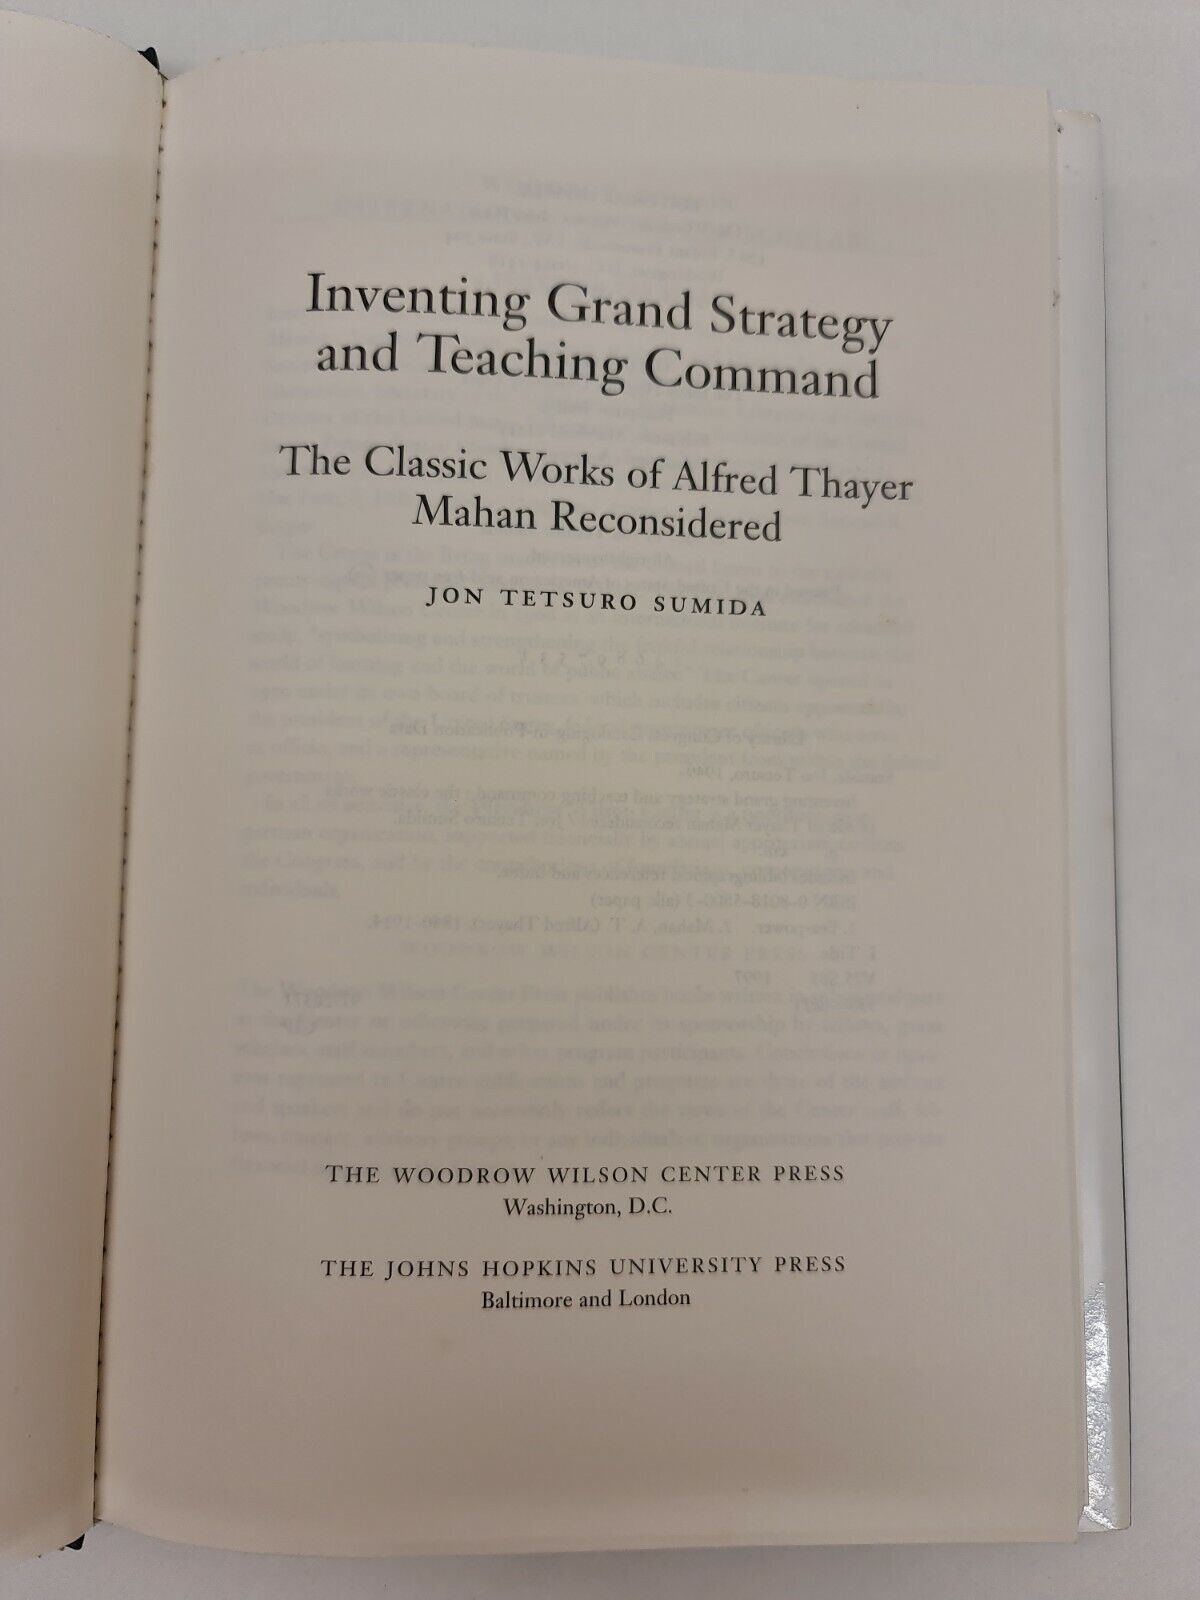 SIGNED Inventing Grand Strategy and Teaching Command by Jon Sumida (1997)